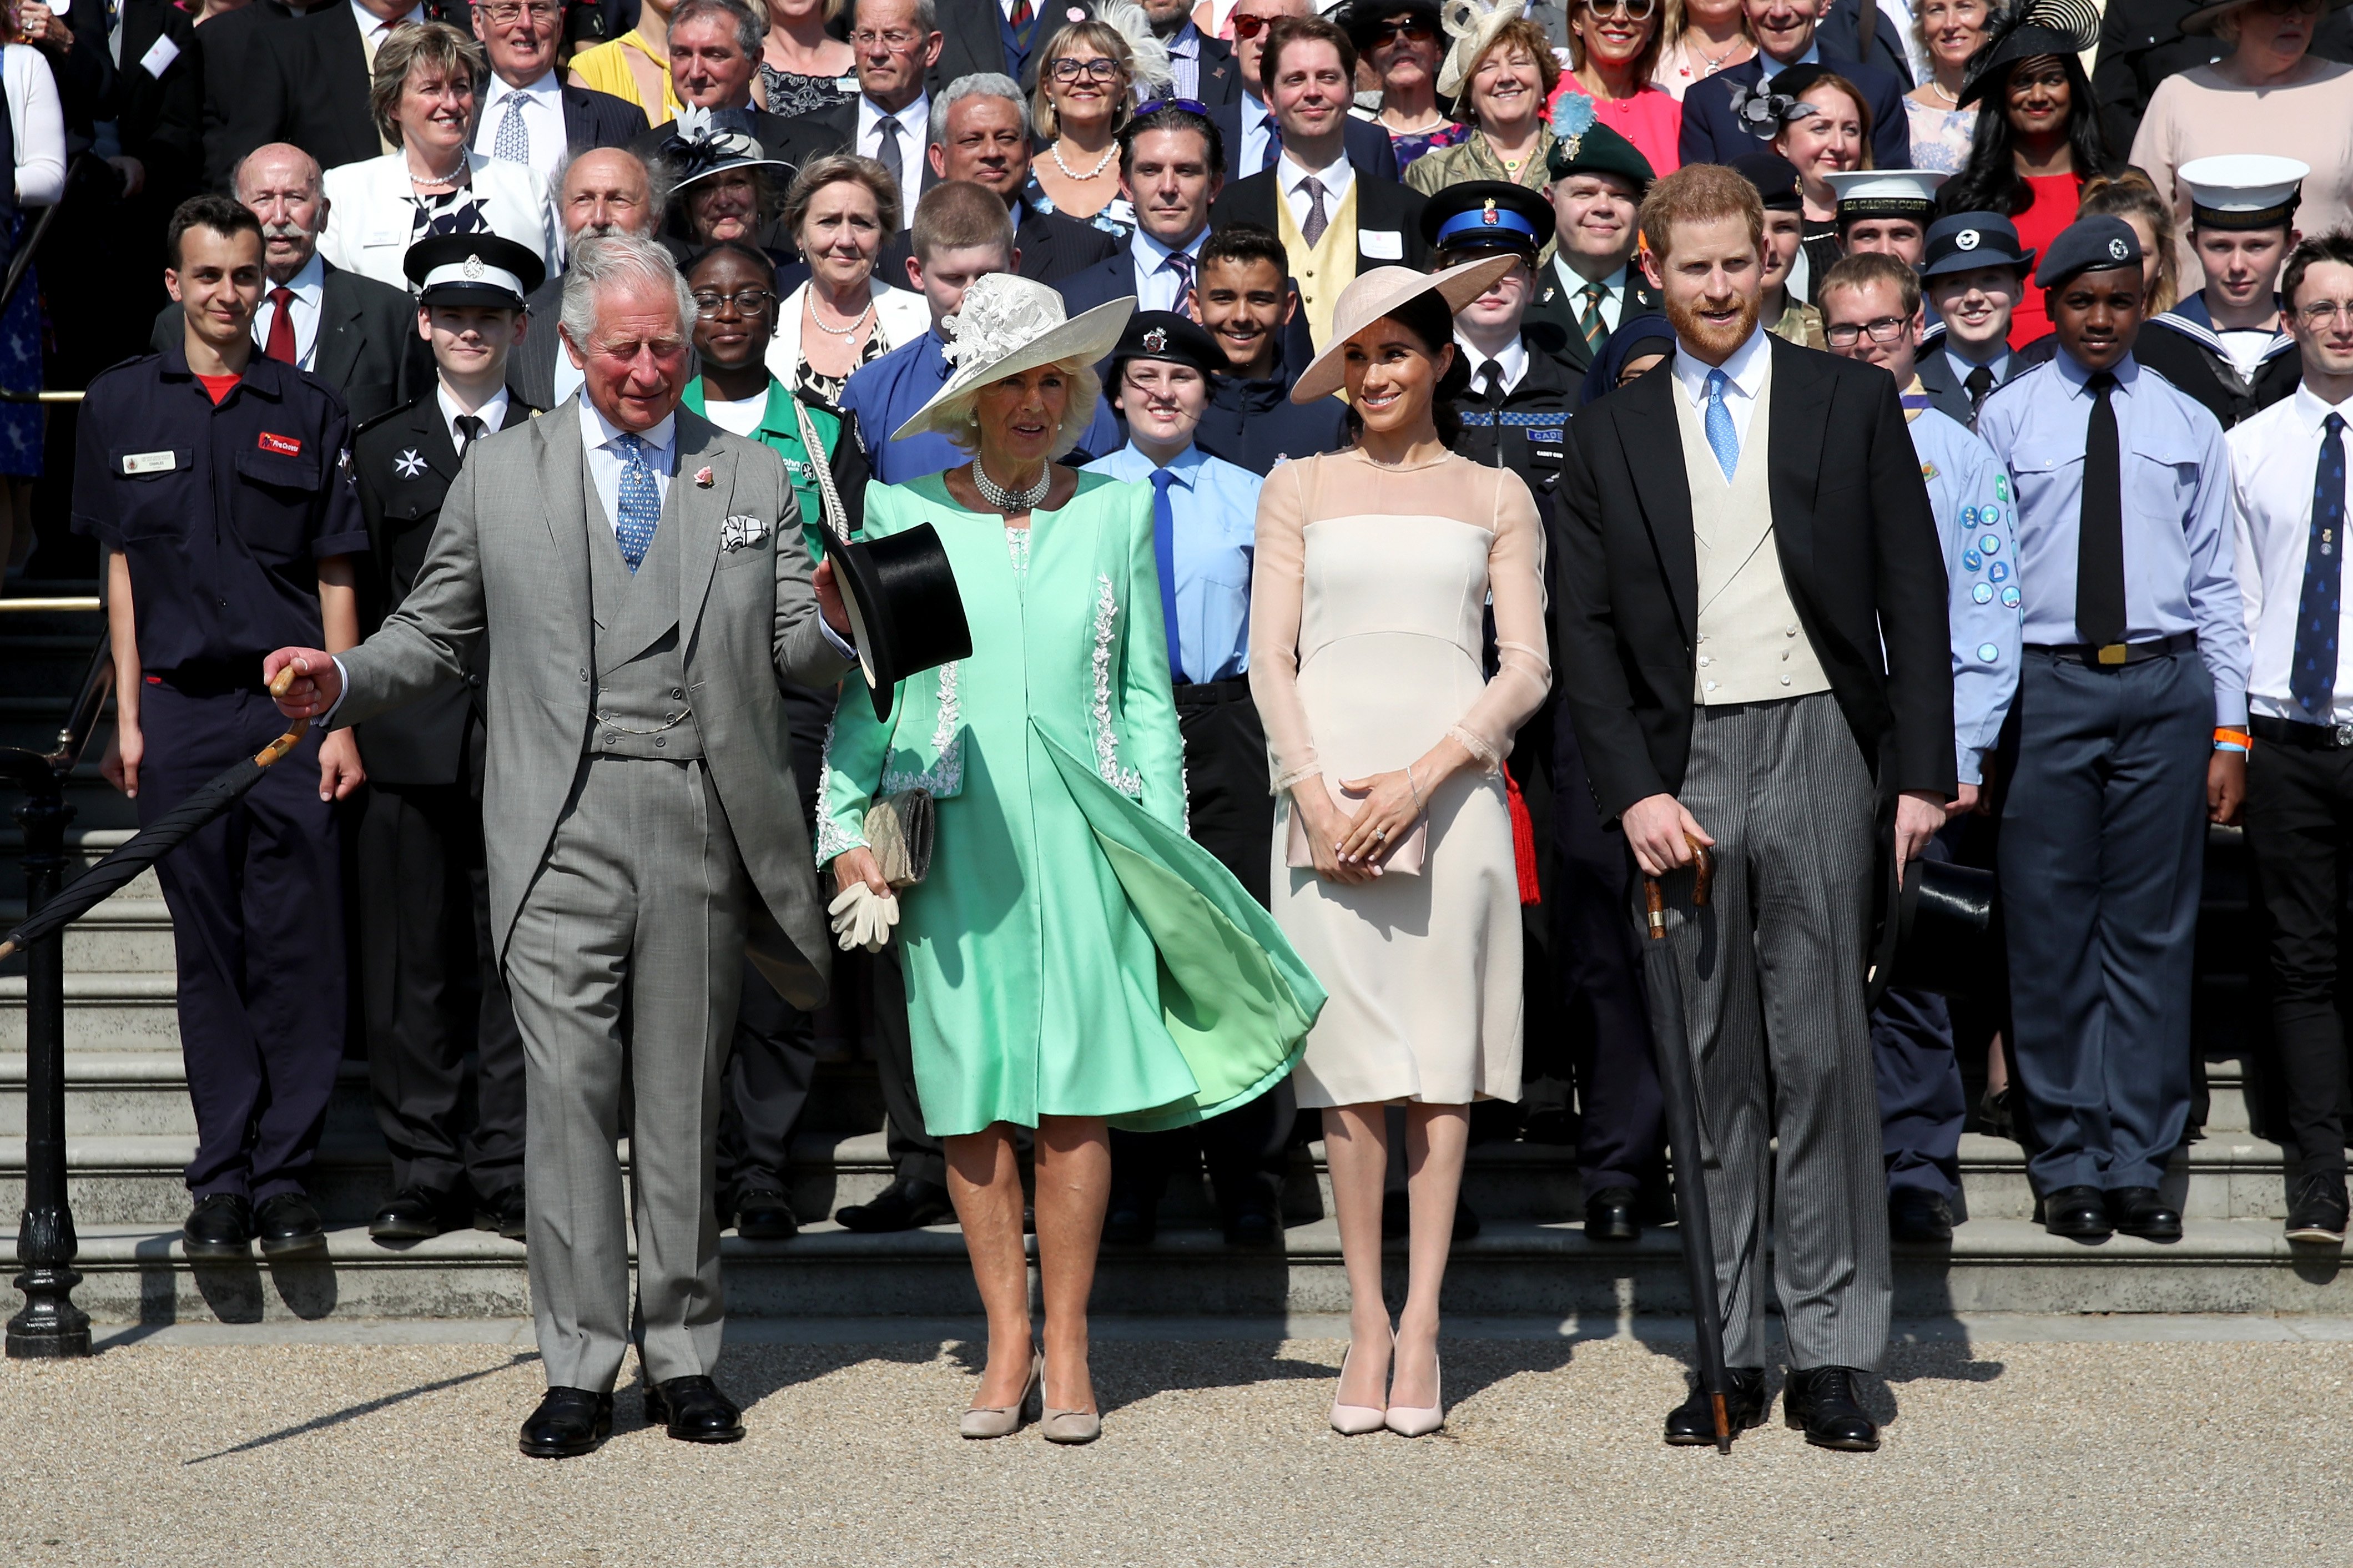 Prince Harry, Duke of Sussex, Prince Charles, Prince of Wales, Camilla, Duchess of Cornwall, Meghan, Duchess of Sussex and guests pose for a photograph as they attend The Prince of Wales' 70th Birthday Patronage Celebration held at Buckingham Palace on May 22, 2018 in London, England | Source: Getty Images 